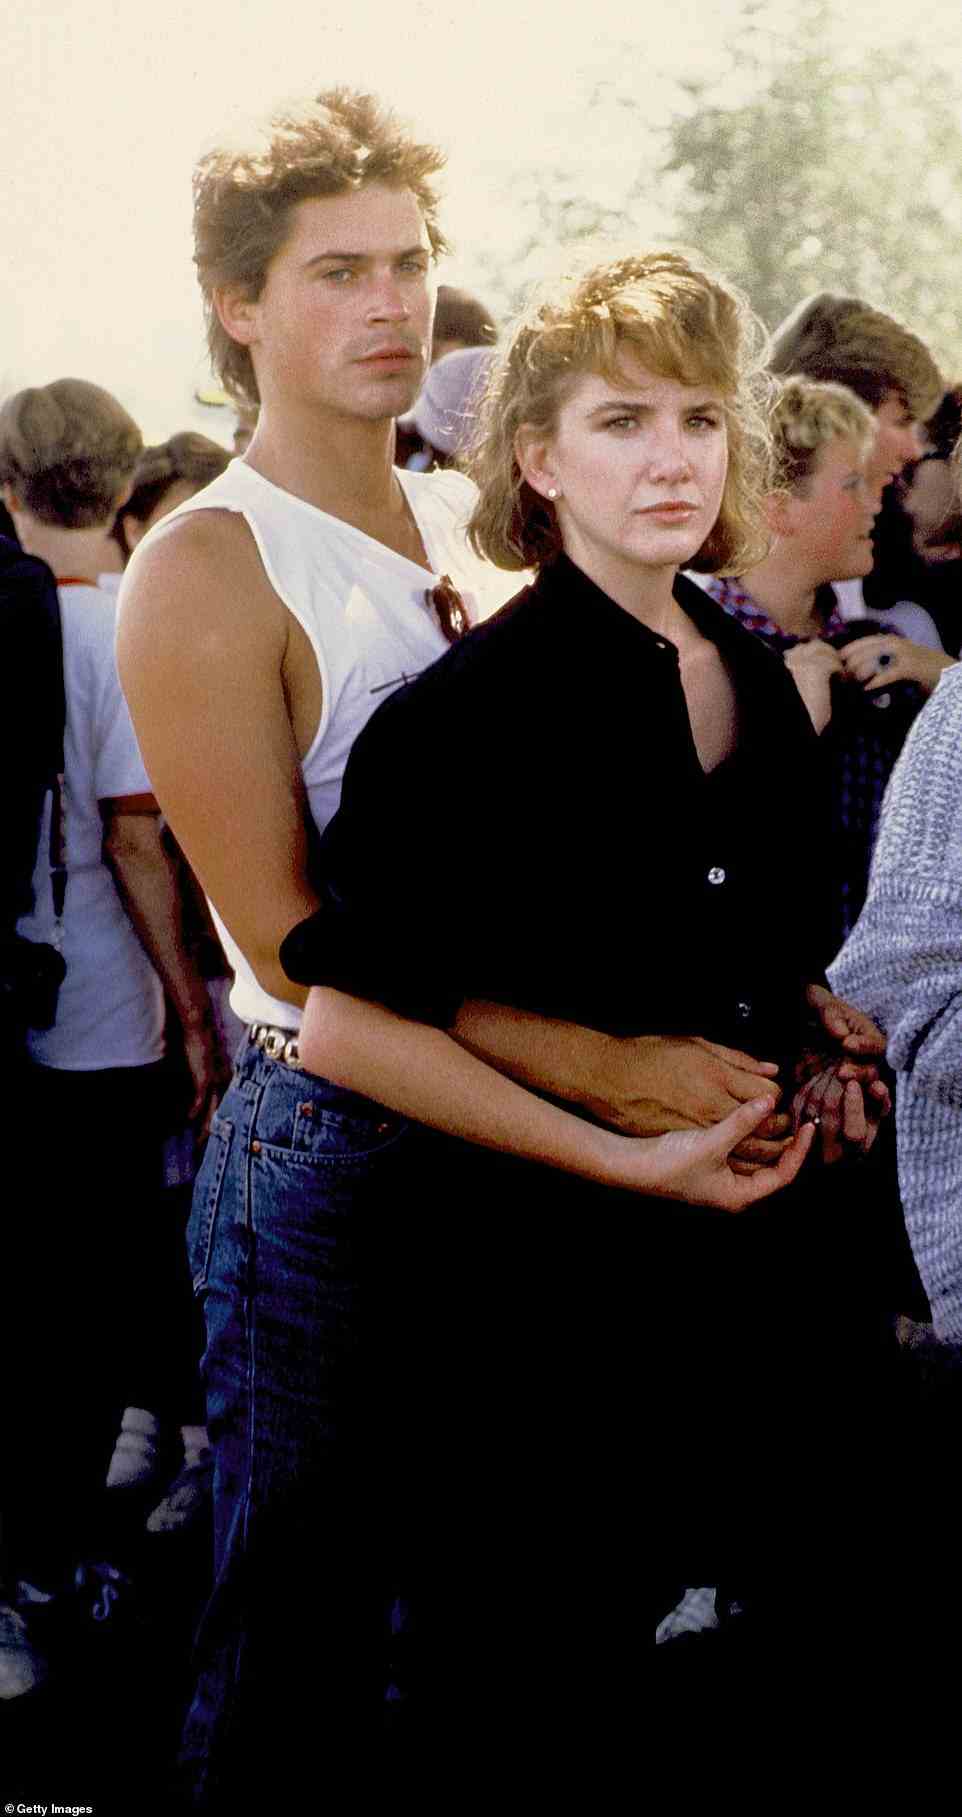 She was also briefly engaged to actor Rob Lowe (pictured together in 1982), and after that ended, she started dating Bo Brinkman - cousin of acclaimed actor Dennis Quaid - whom she married in 1988 and divorced in 1992